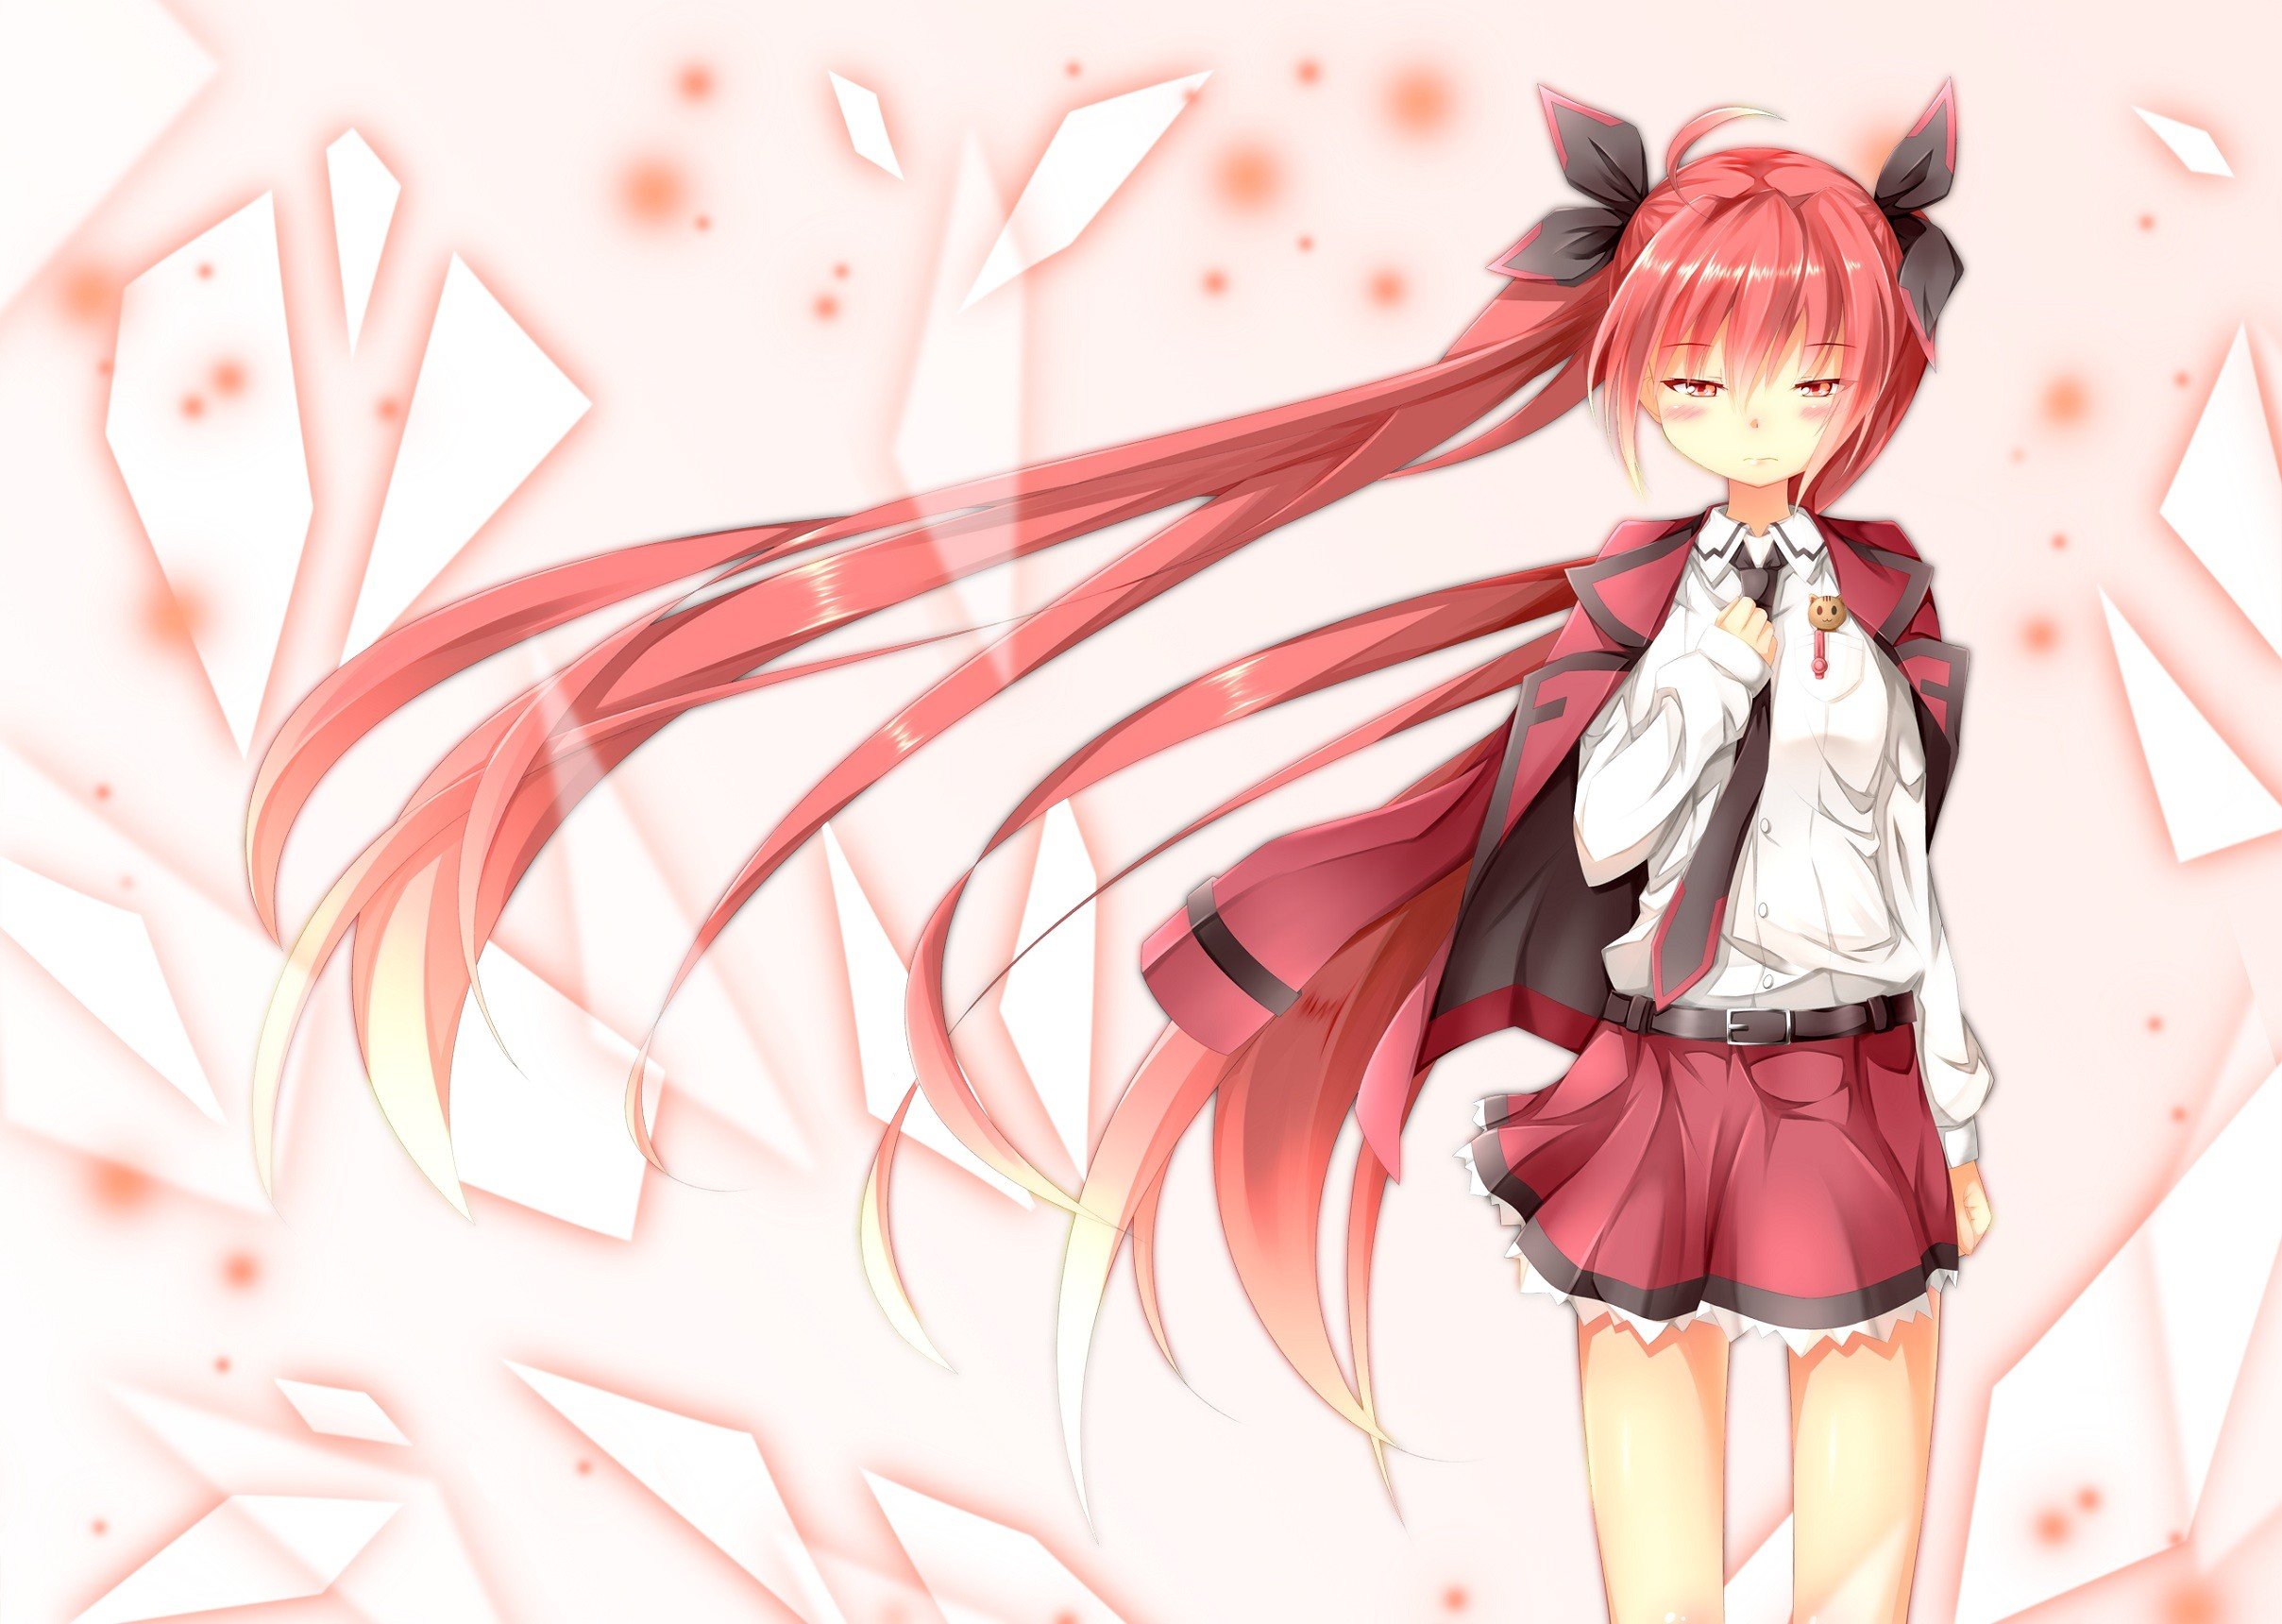 long hair, Red eyes, Redhead, Simple background, Blushing, Date A Live, Itsuka Kotori, School uniform, Skirt, Red skirt, Tie, Twintails Wallpaper